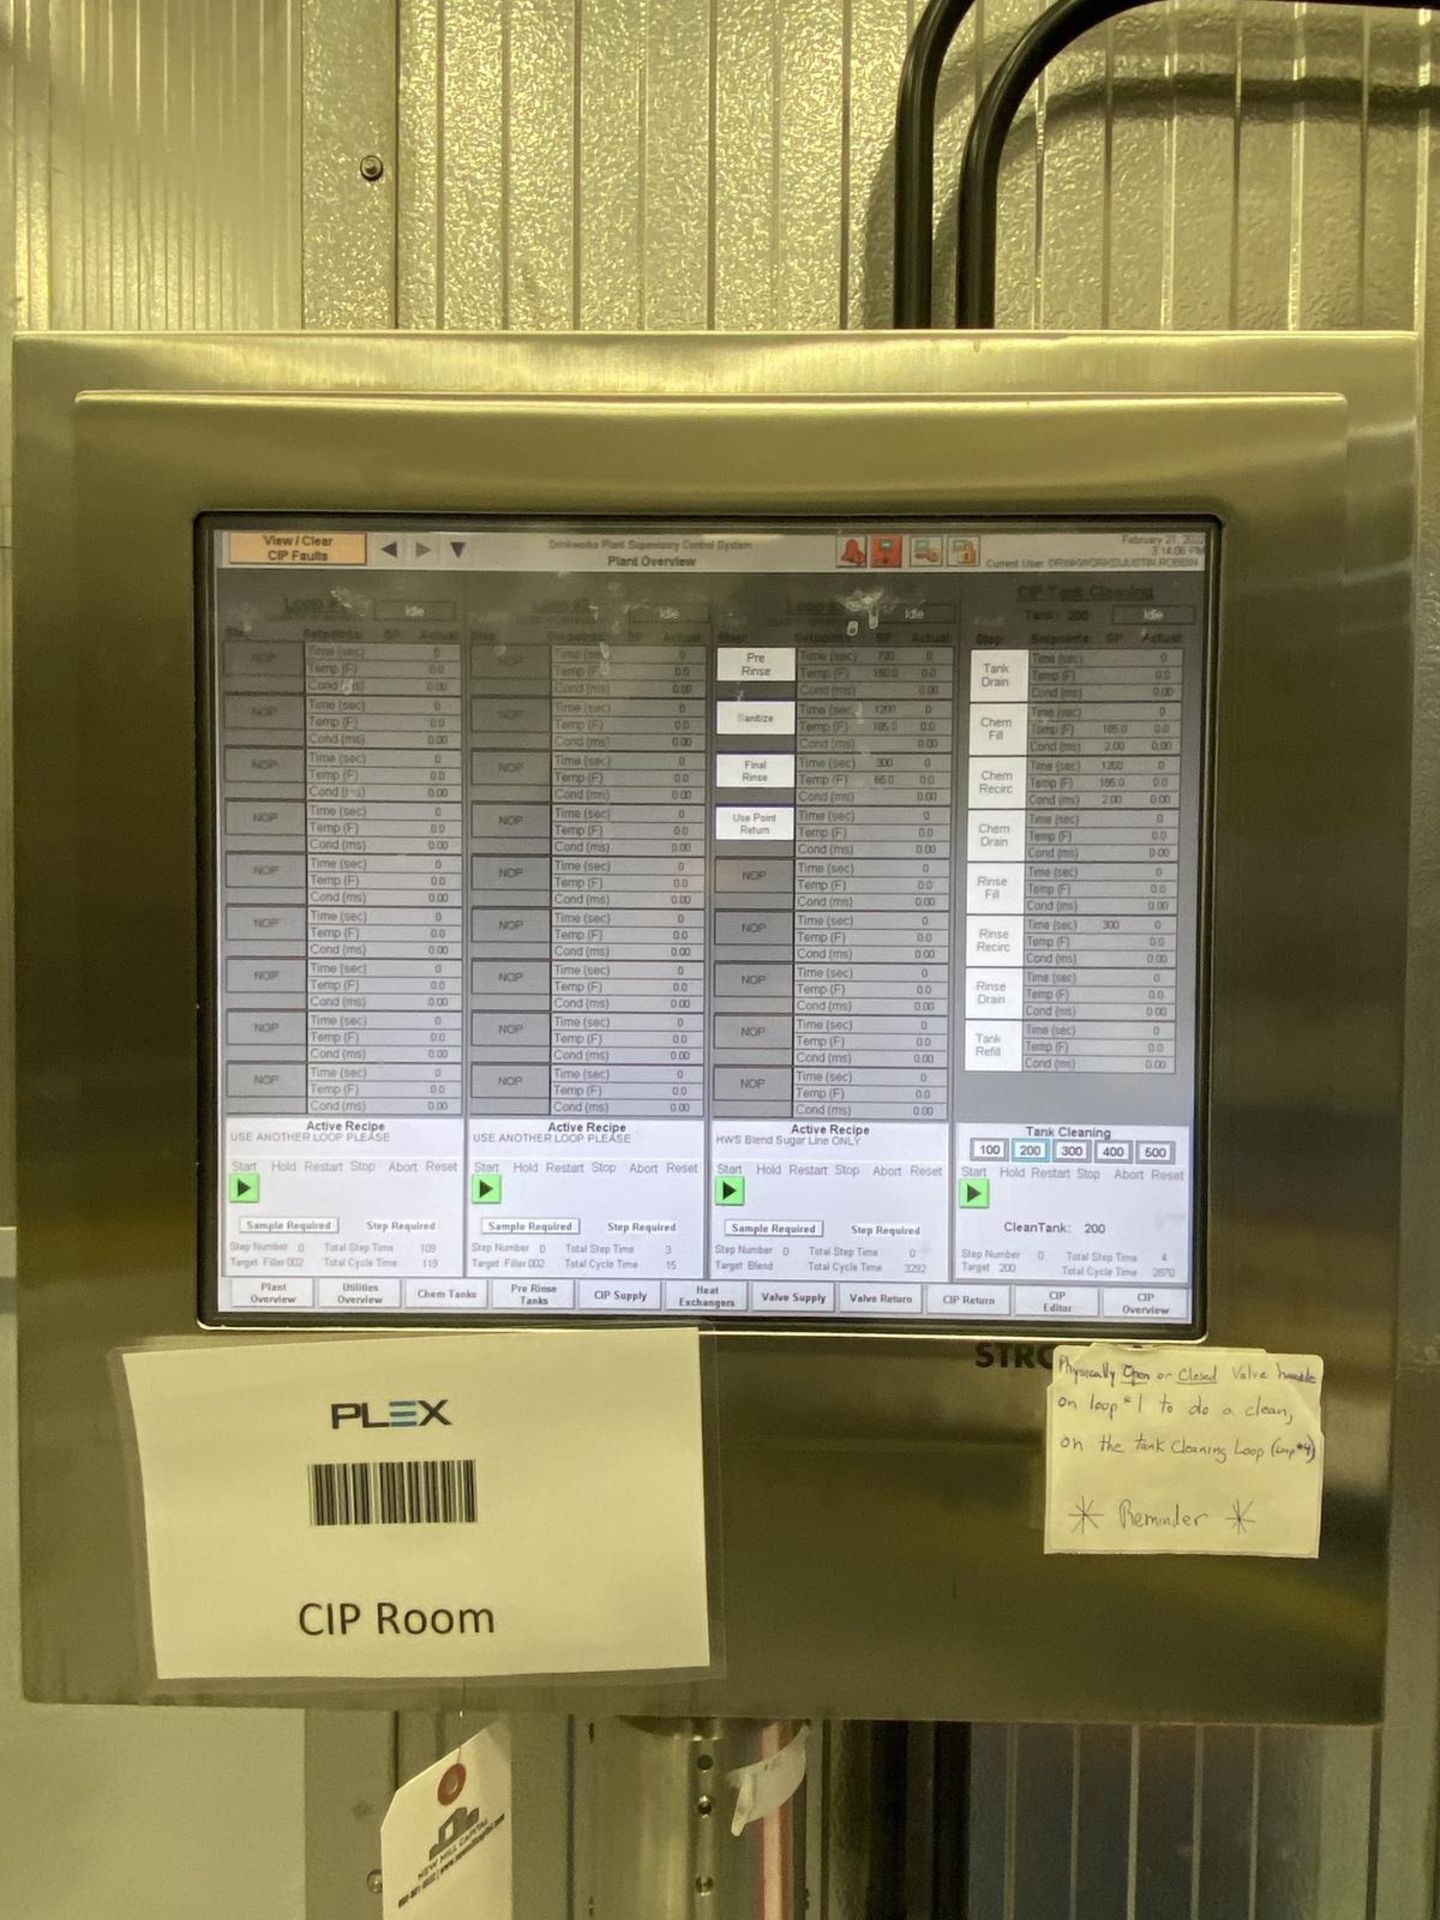 Bulk for CIP System & Control Panel, Includes Lots 80 thru 98A - Subj to Piecemeal | Rig Fee: $5000 - Image 7 of 7